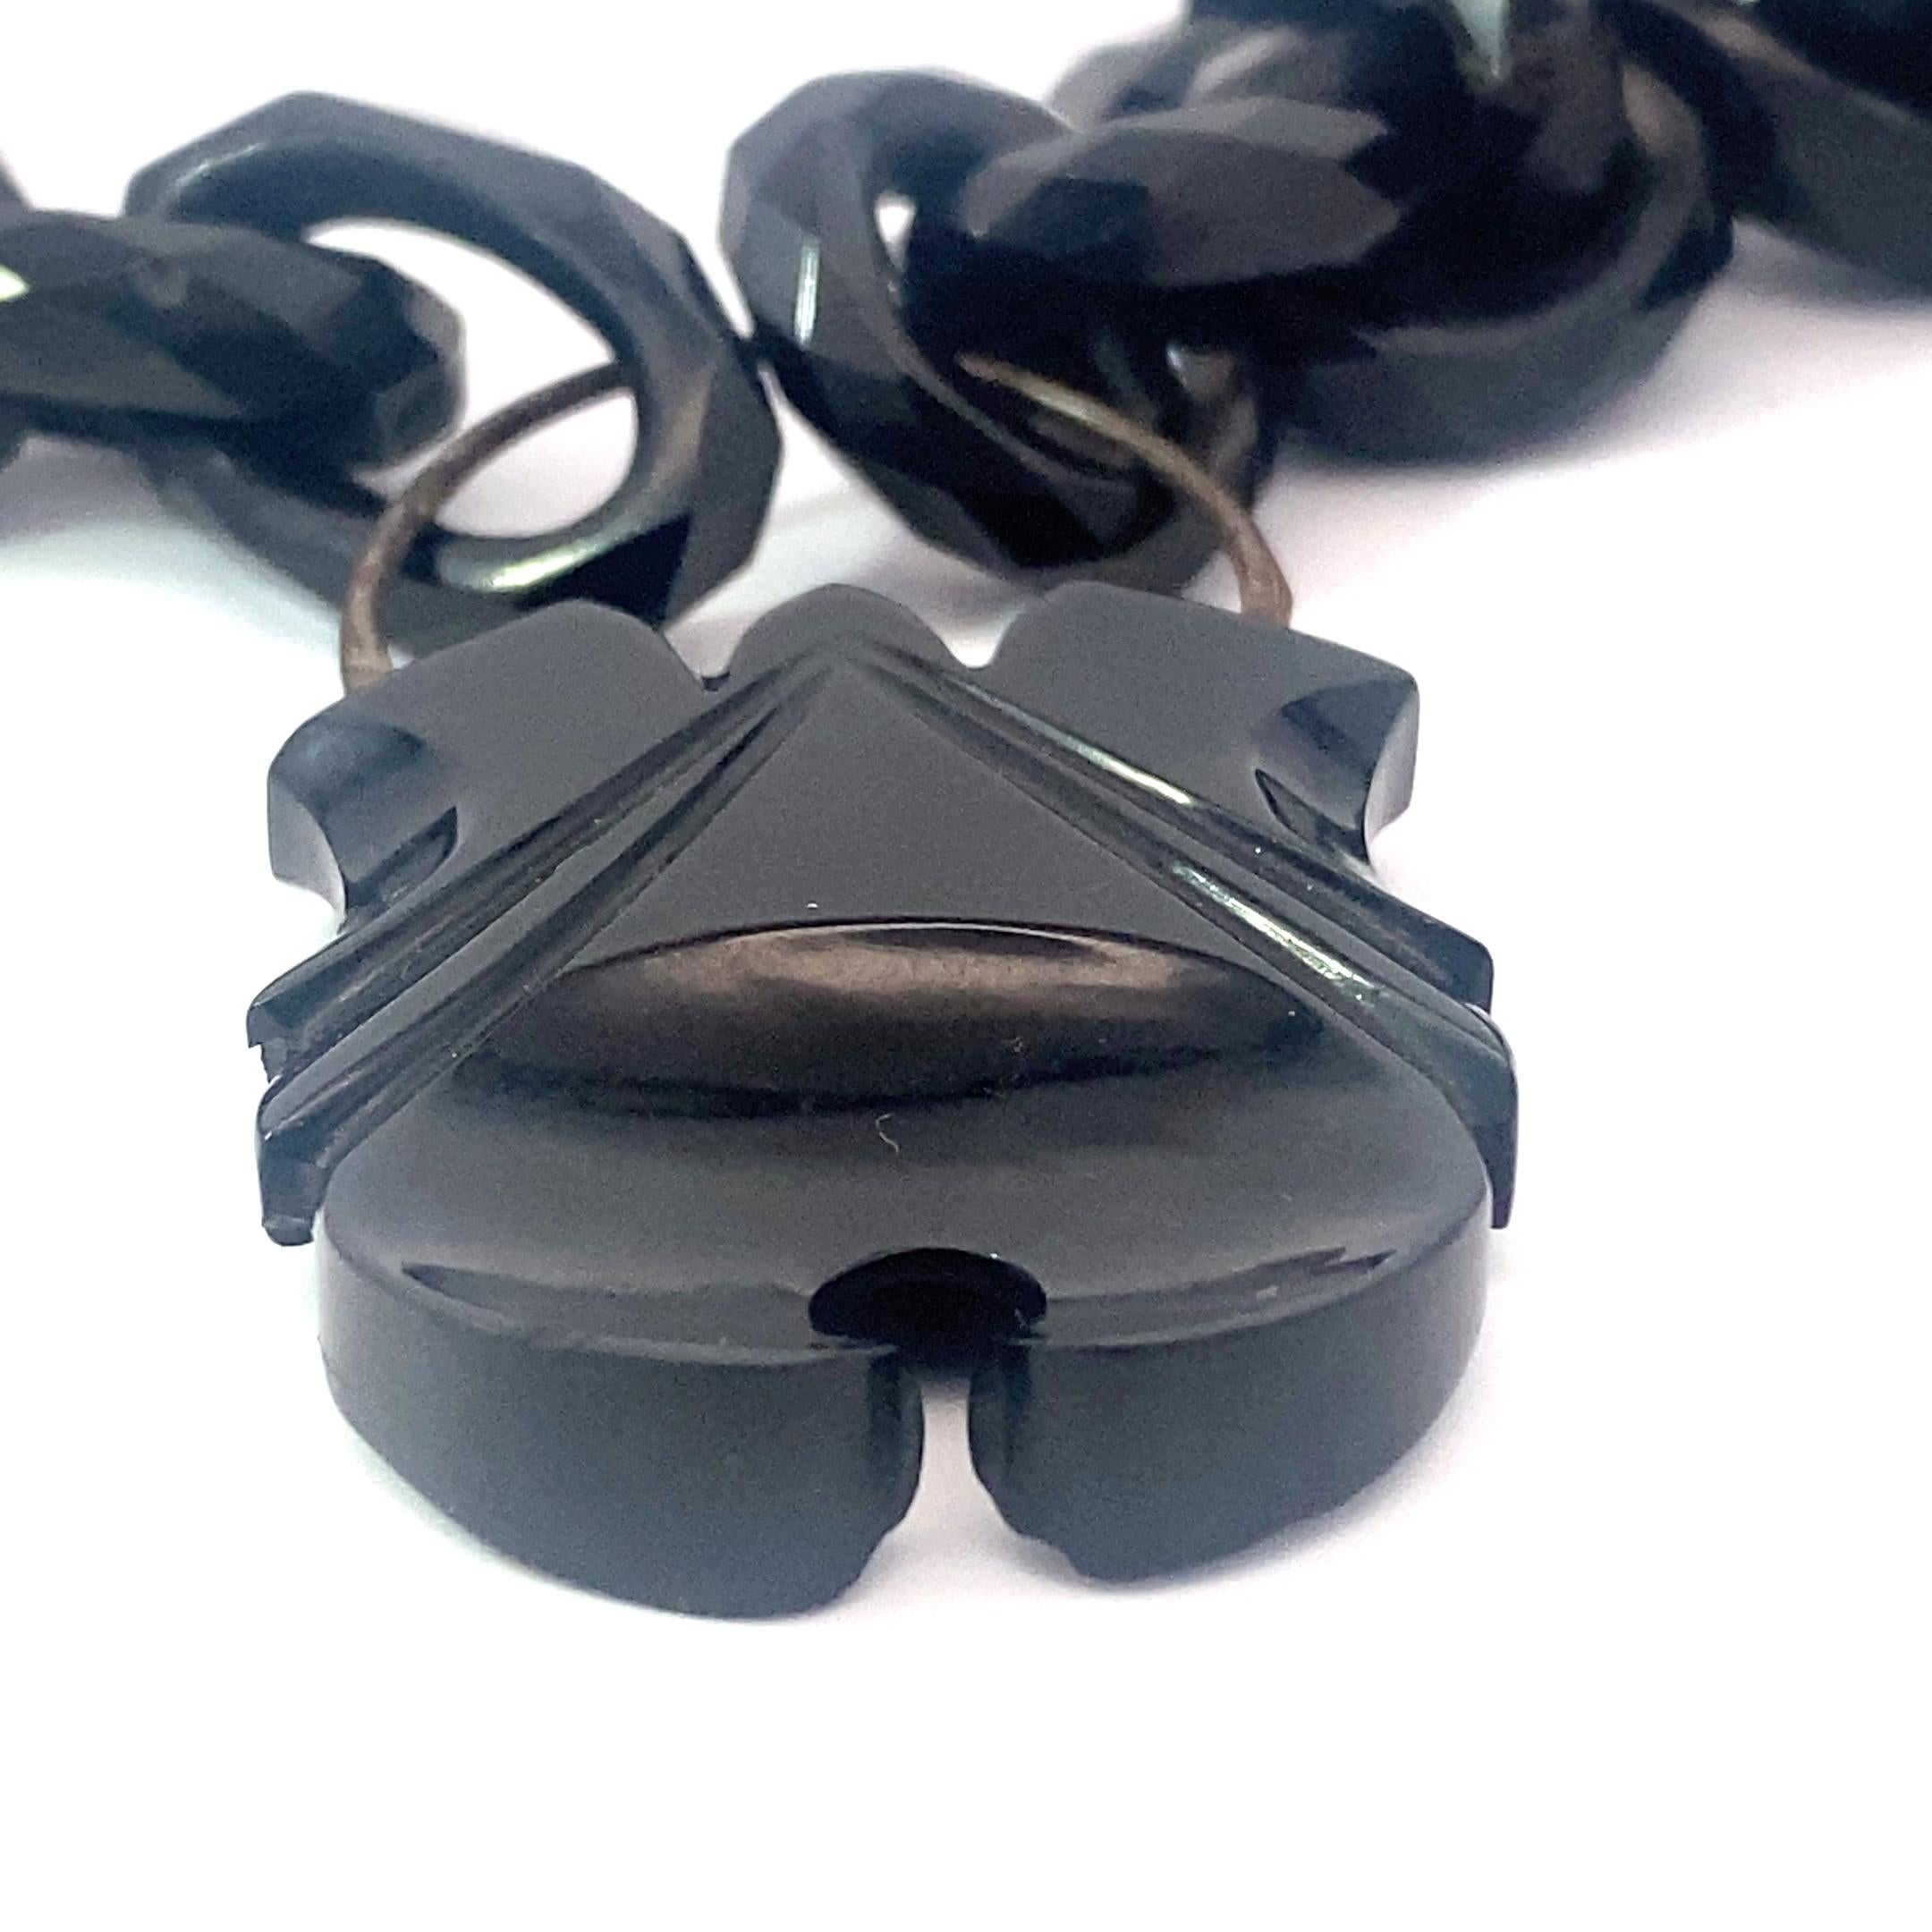 incredible whitby jet link chain with carved whitby jet padlock. this carved chain boasts approximately 24 inches of hand carved and light-weight links. Since each link is carved and assembled by hand, they are all a bit different, making them